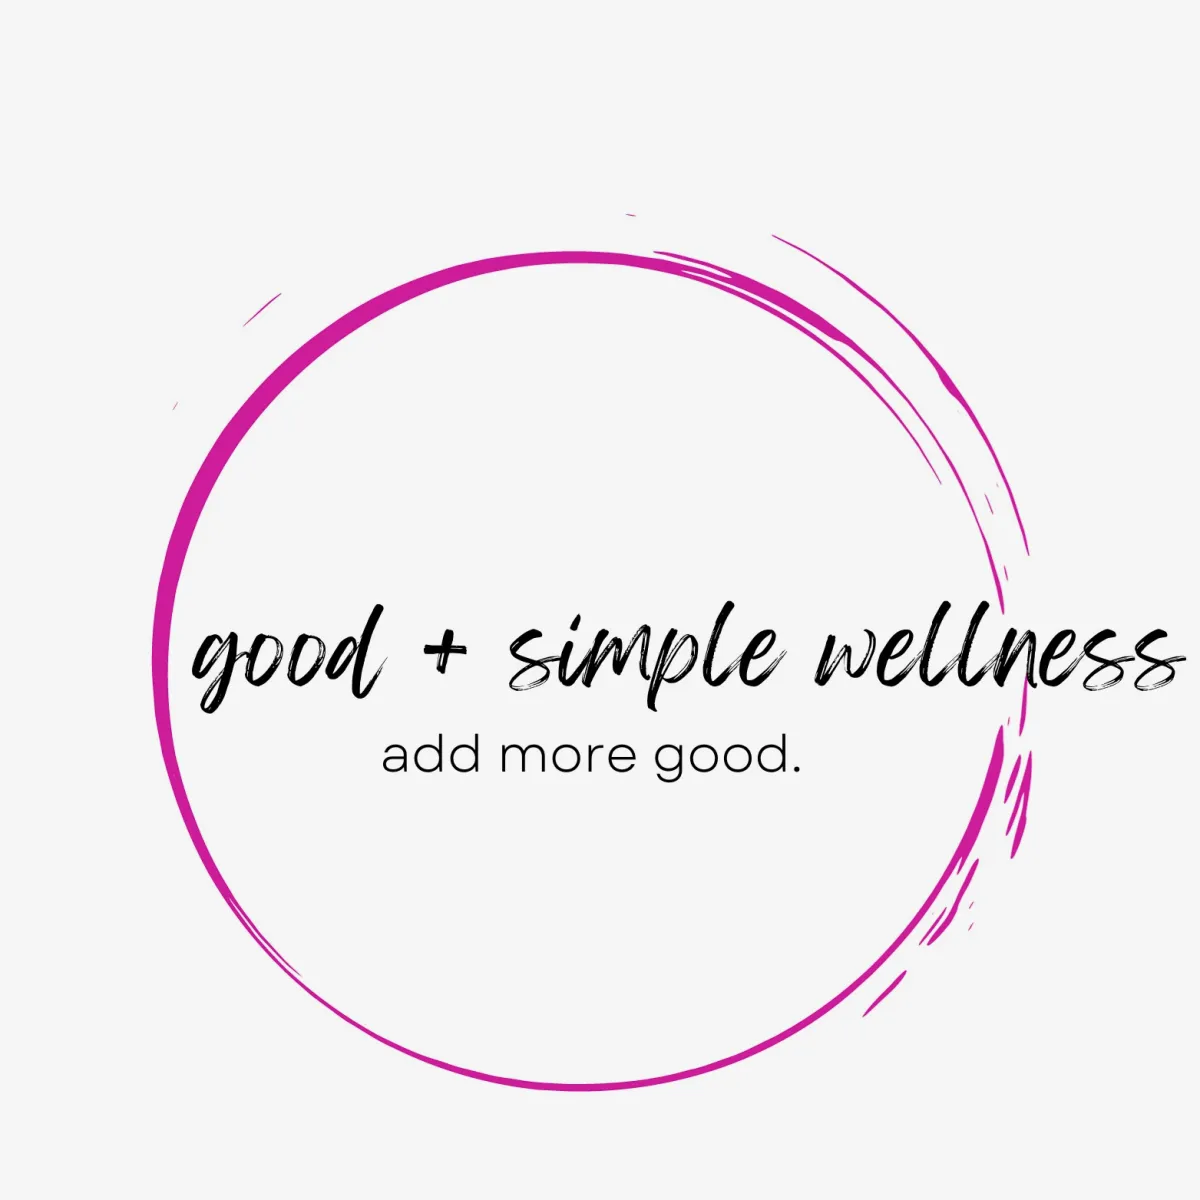 Personal Training Business Client | Good Simple Wellness